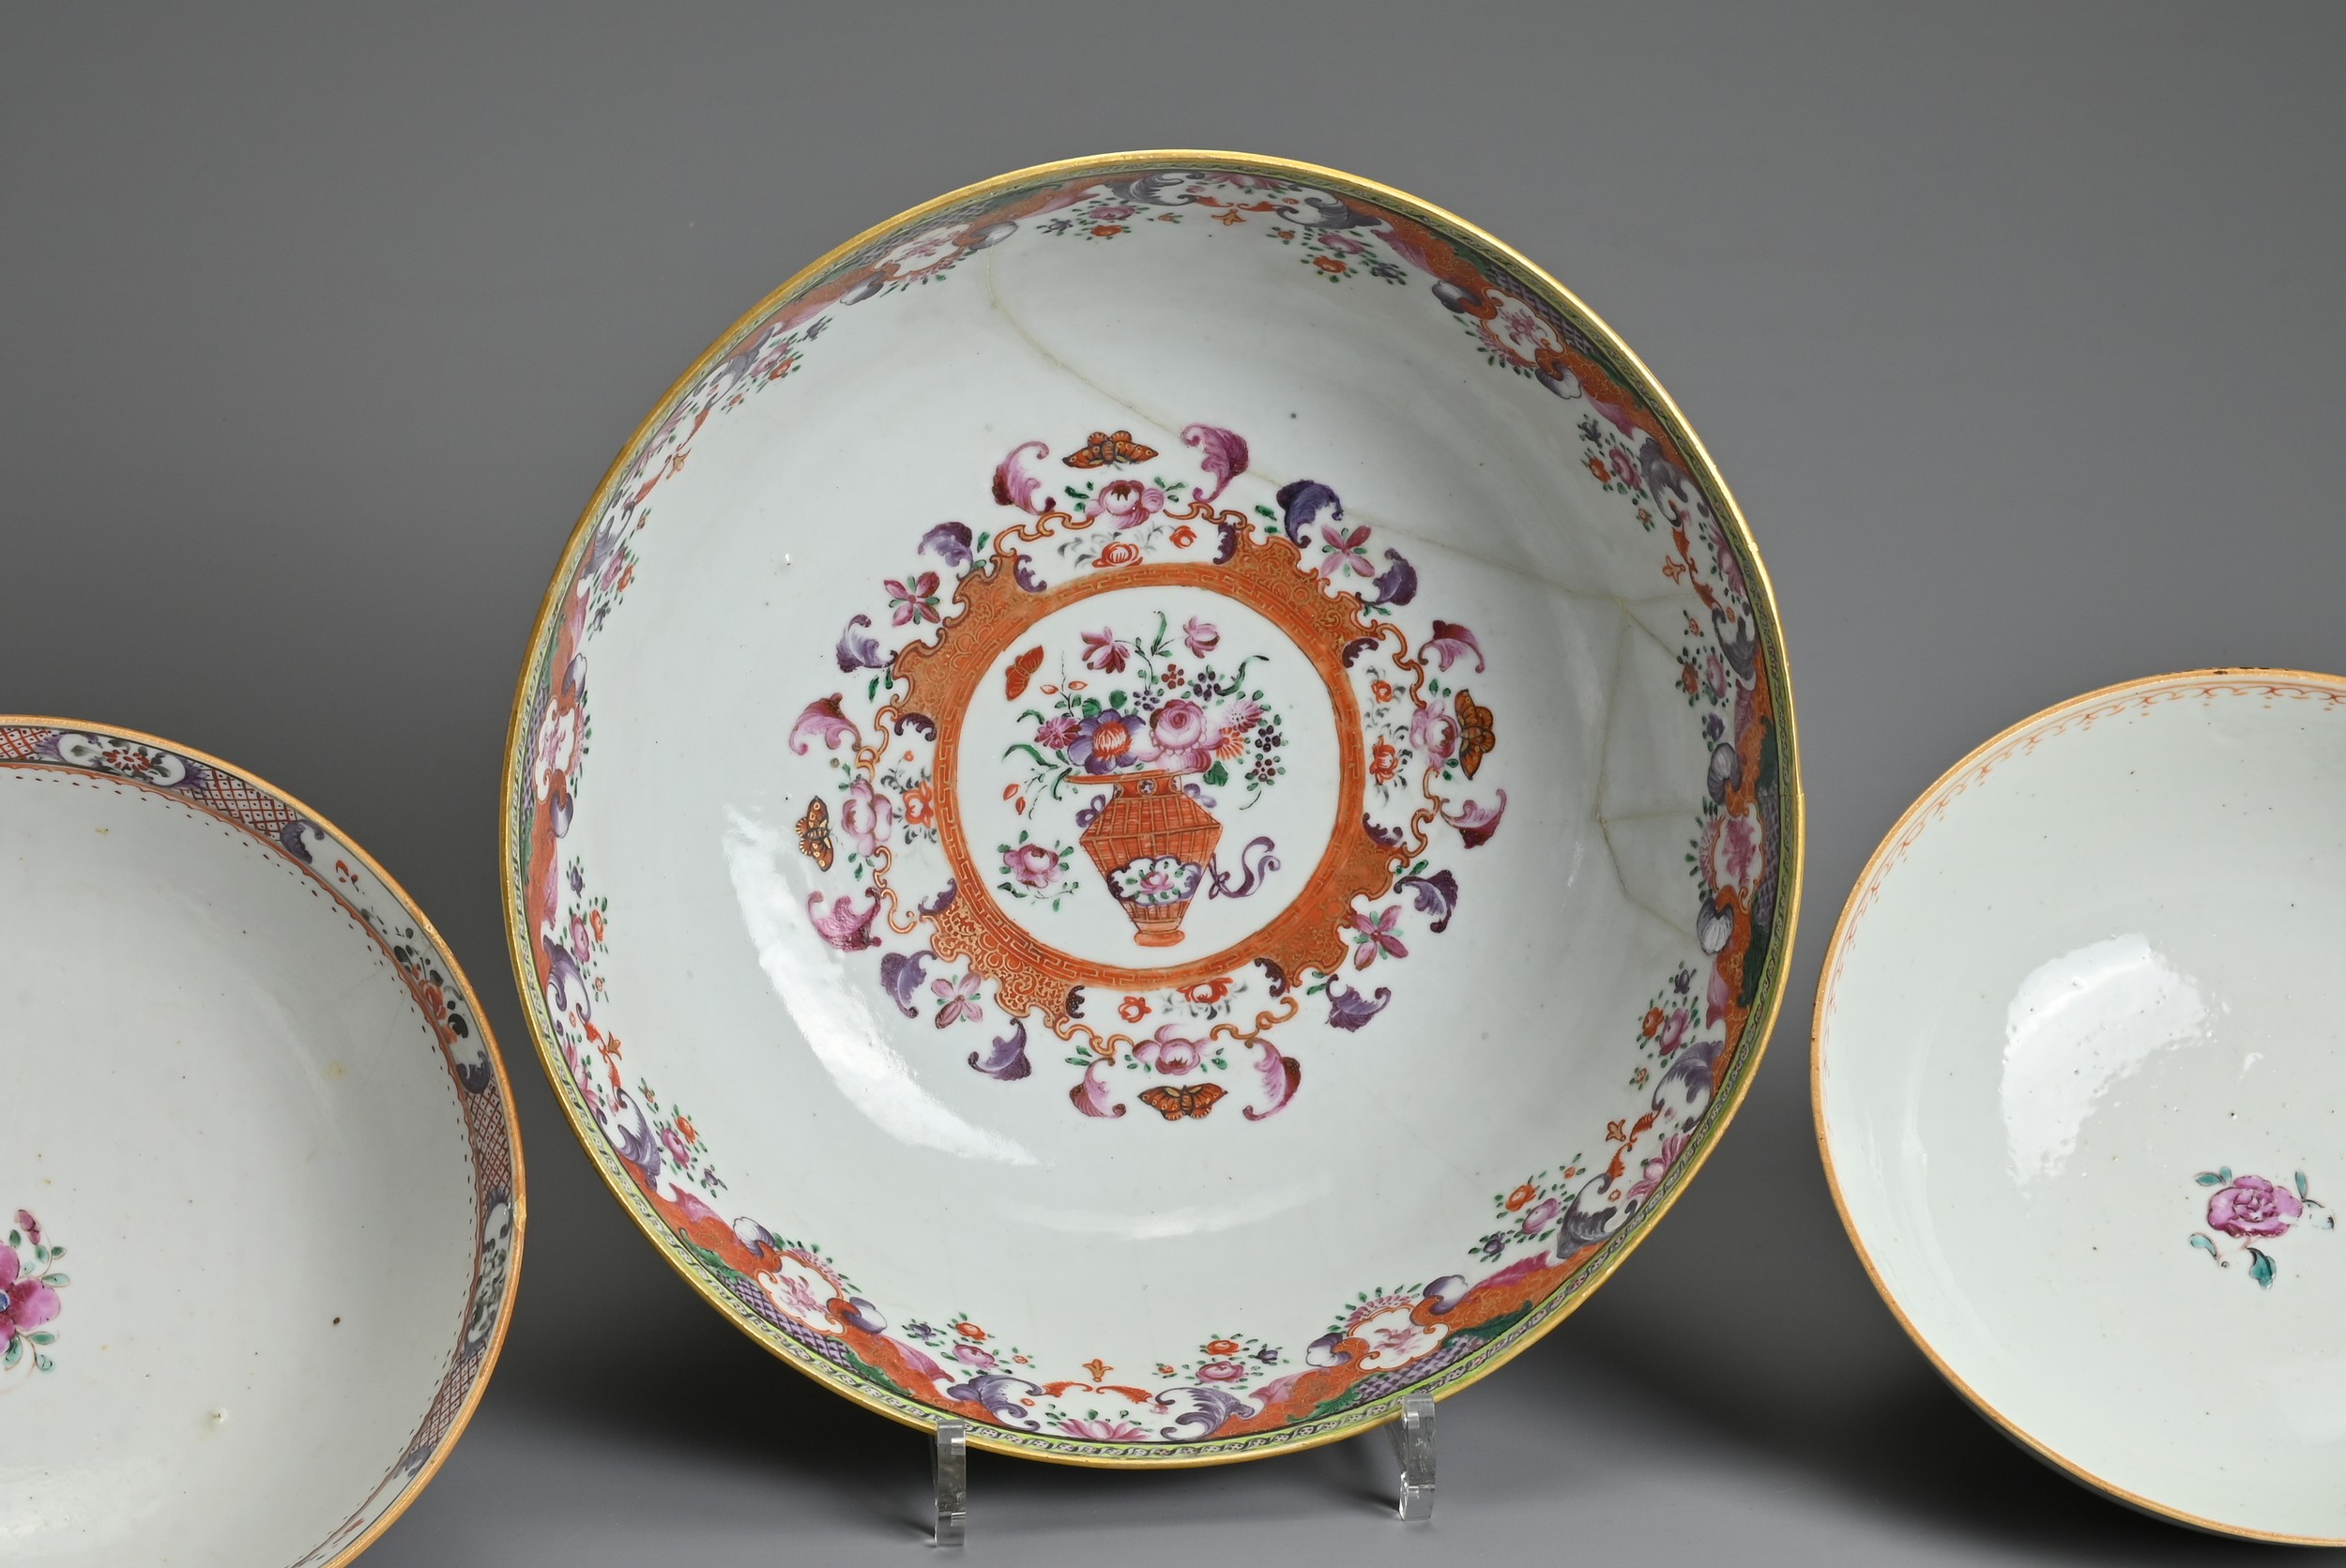 THREE CHINESE FAMILLE ROSE PORCELAIN BOWLS, 18TH CENTURY. Of graduating sizes decorated with various - Image 5 of 6